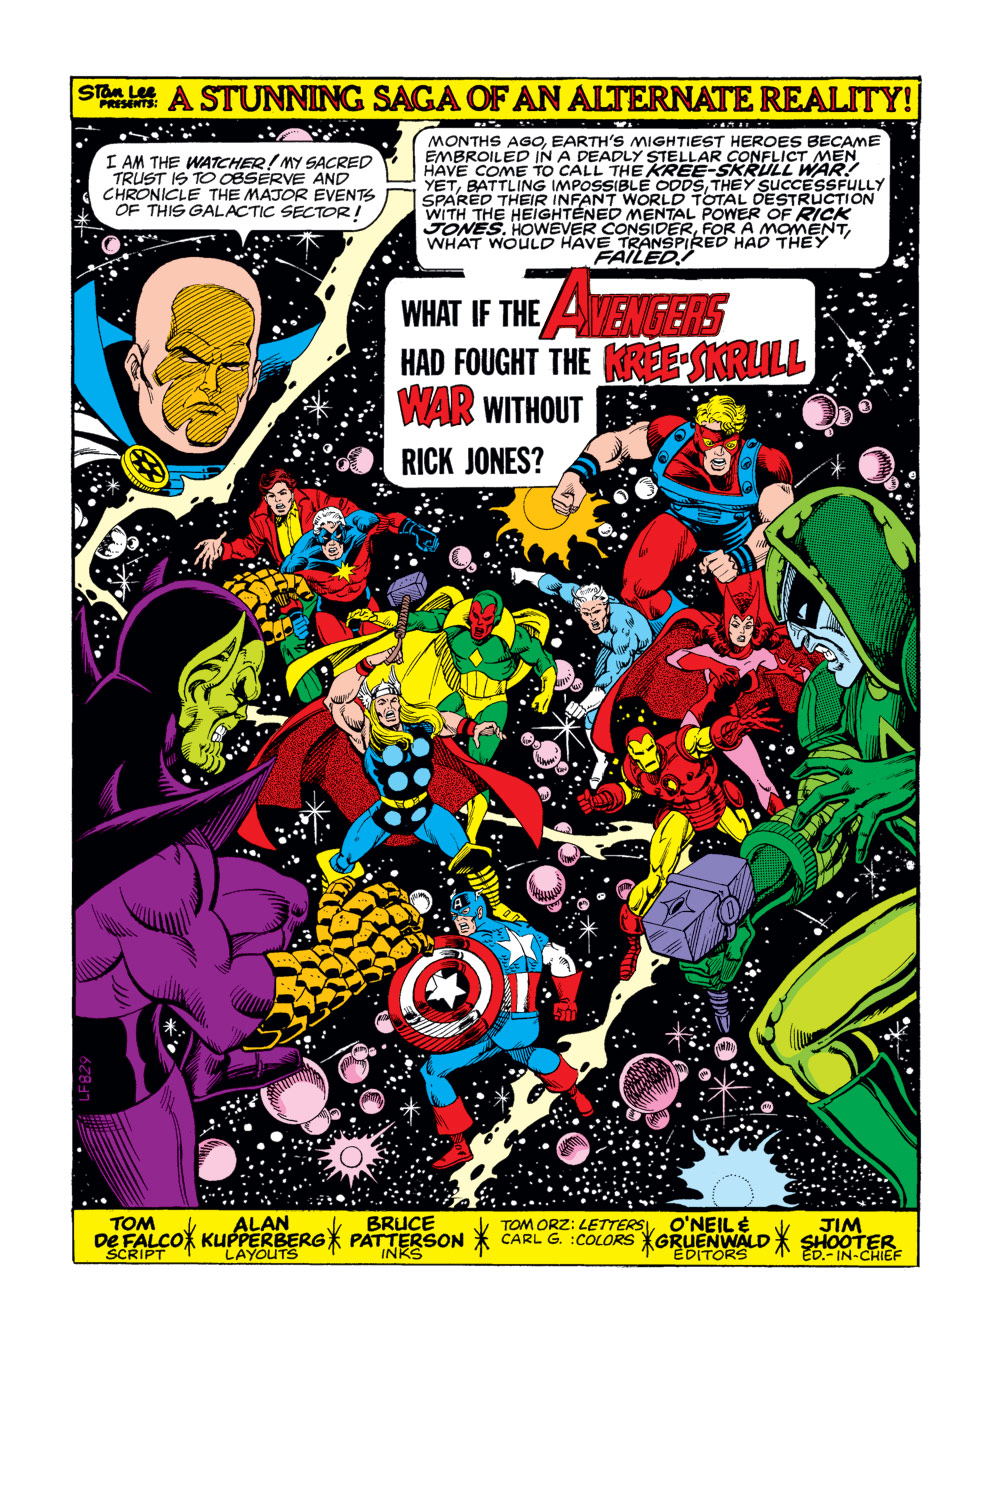 What If? (1977) Issue #20 - The Avengers fought the Kree-Skrull war without Rick Jones #20 - English 2